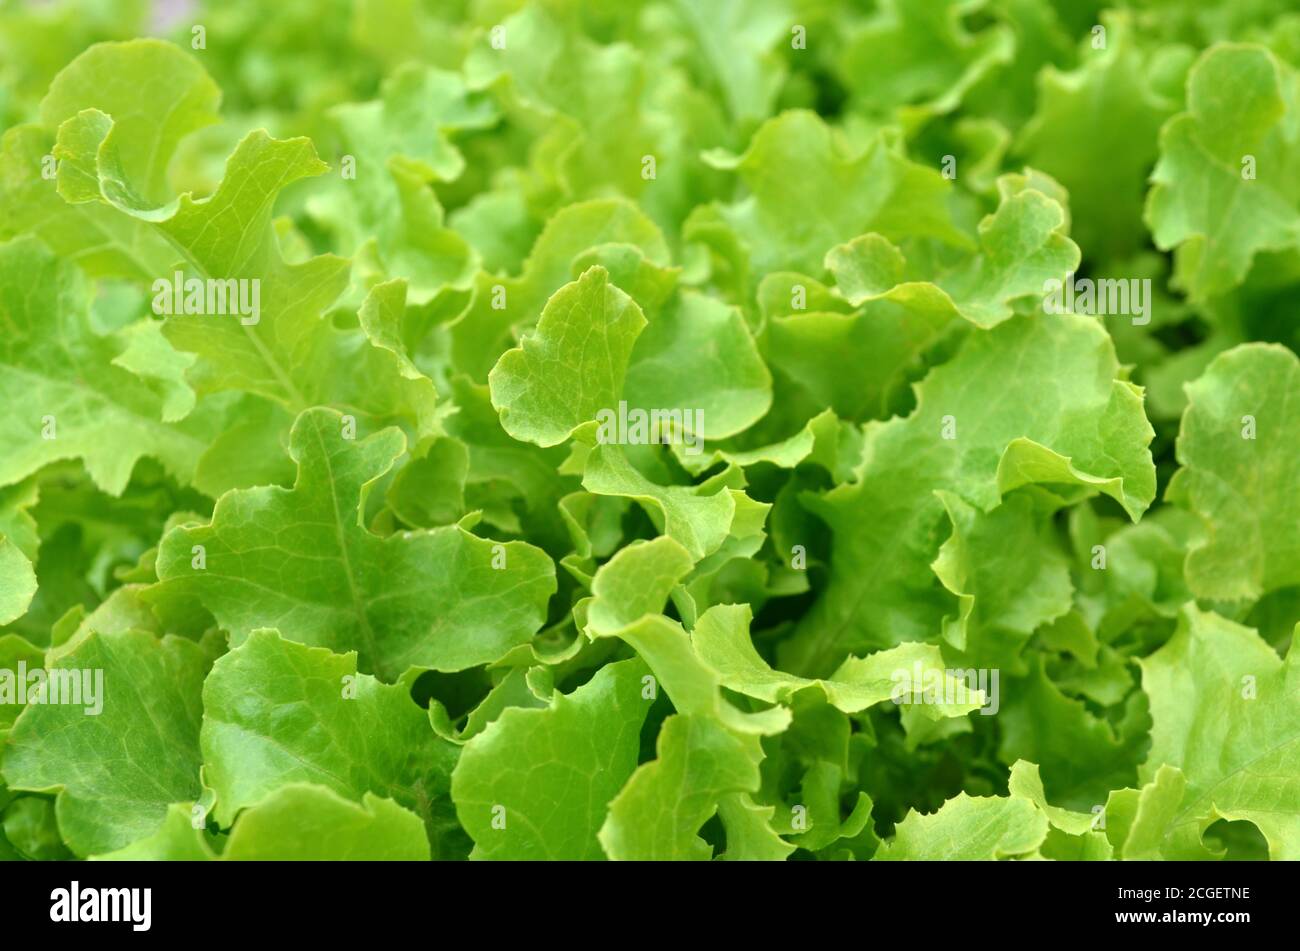 Fresh green salad as a nature background. Close-up, selective focus Stock Photo